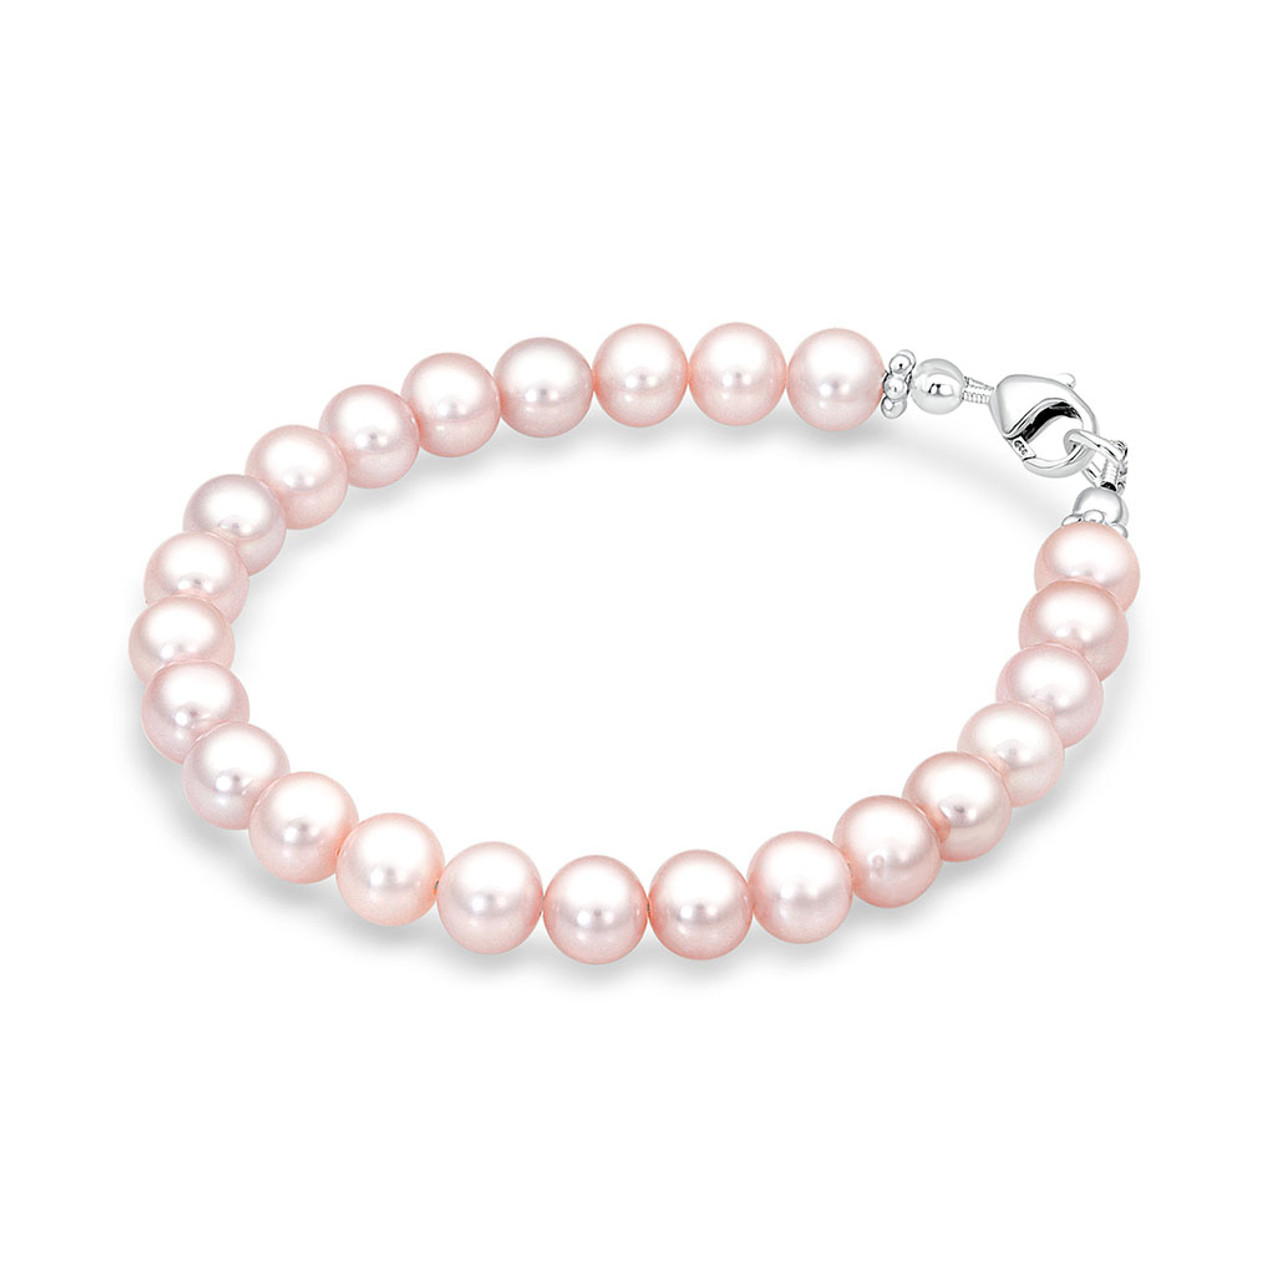 Girls Pearl Bracelet - Pink  Silver - The Jeweled Lullaby